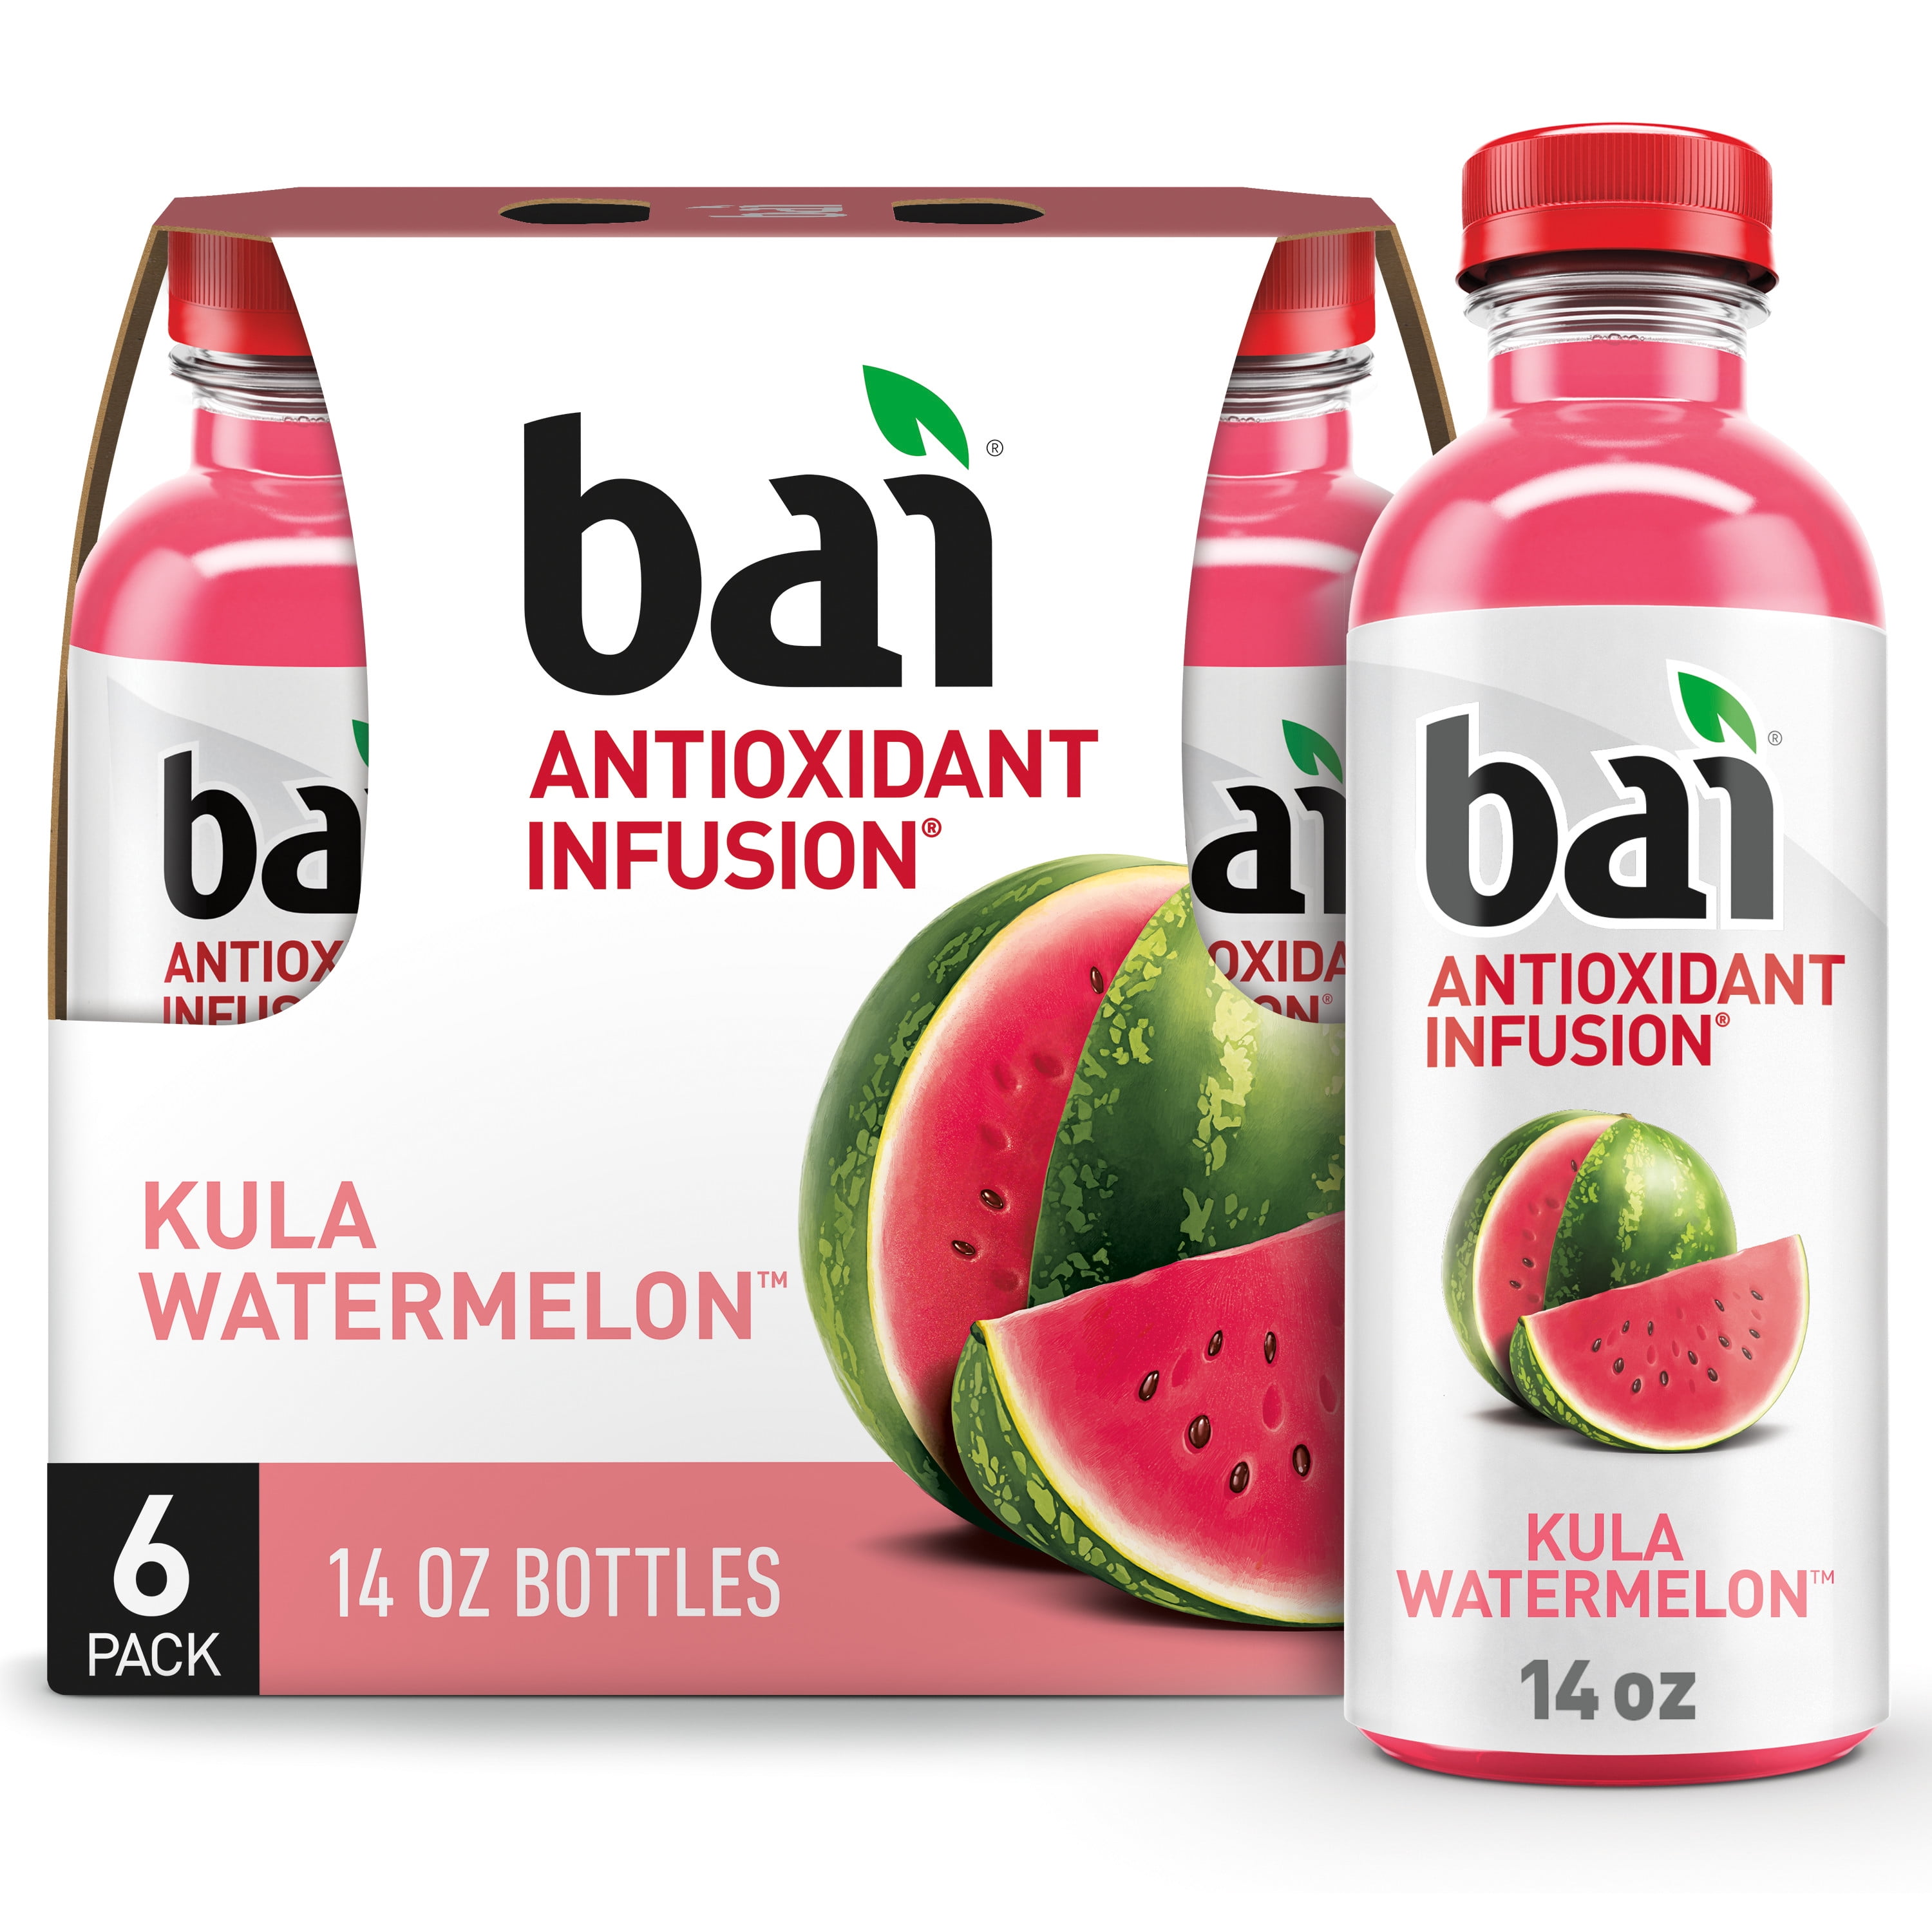 Bai Cocofusions Variety Pack, Antioxidant Infused Beverage (18 fl